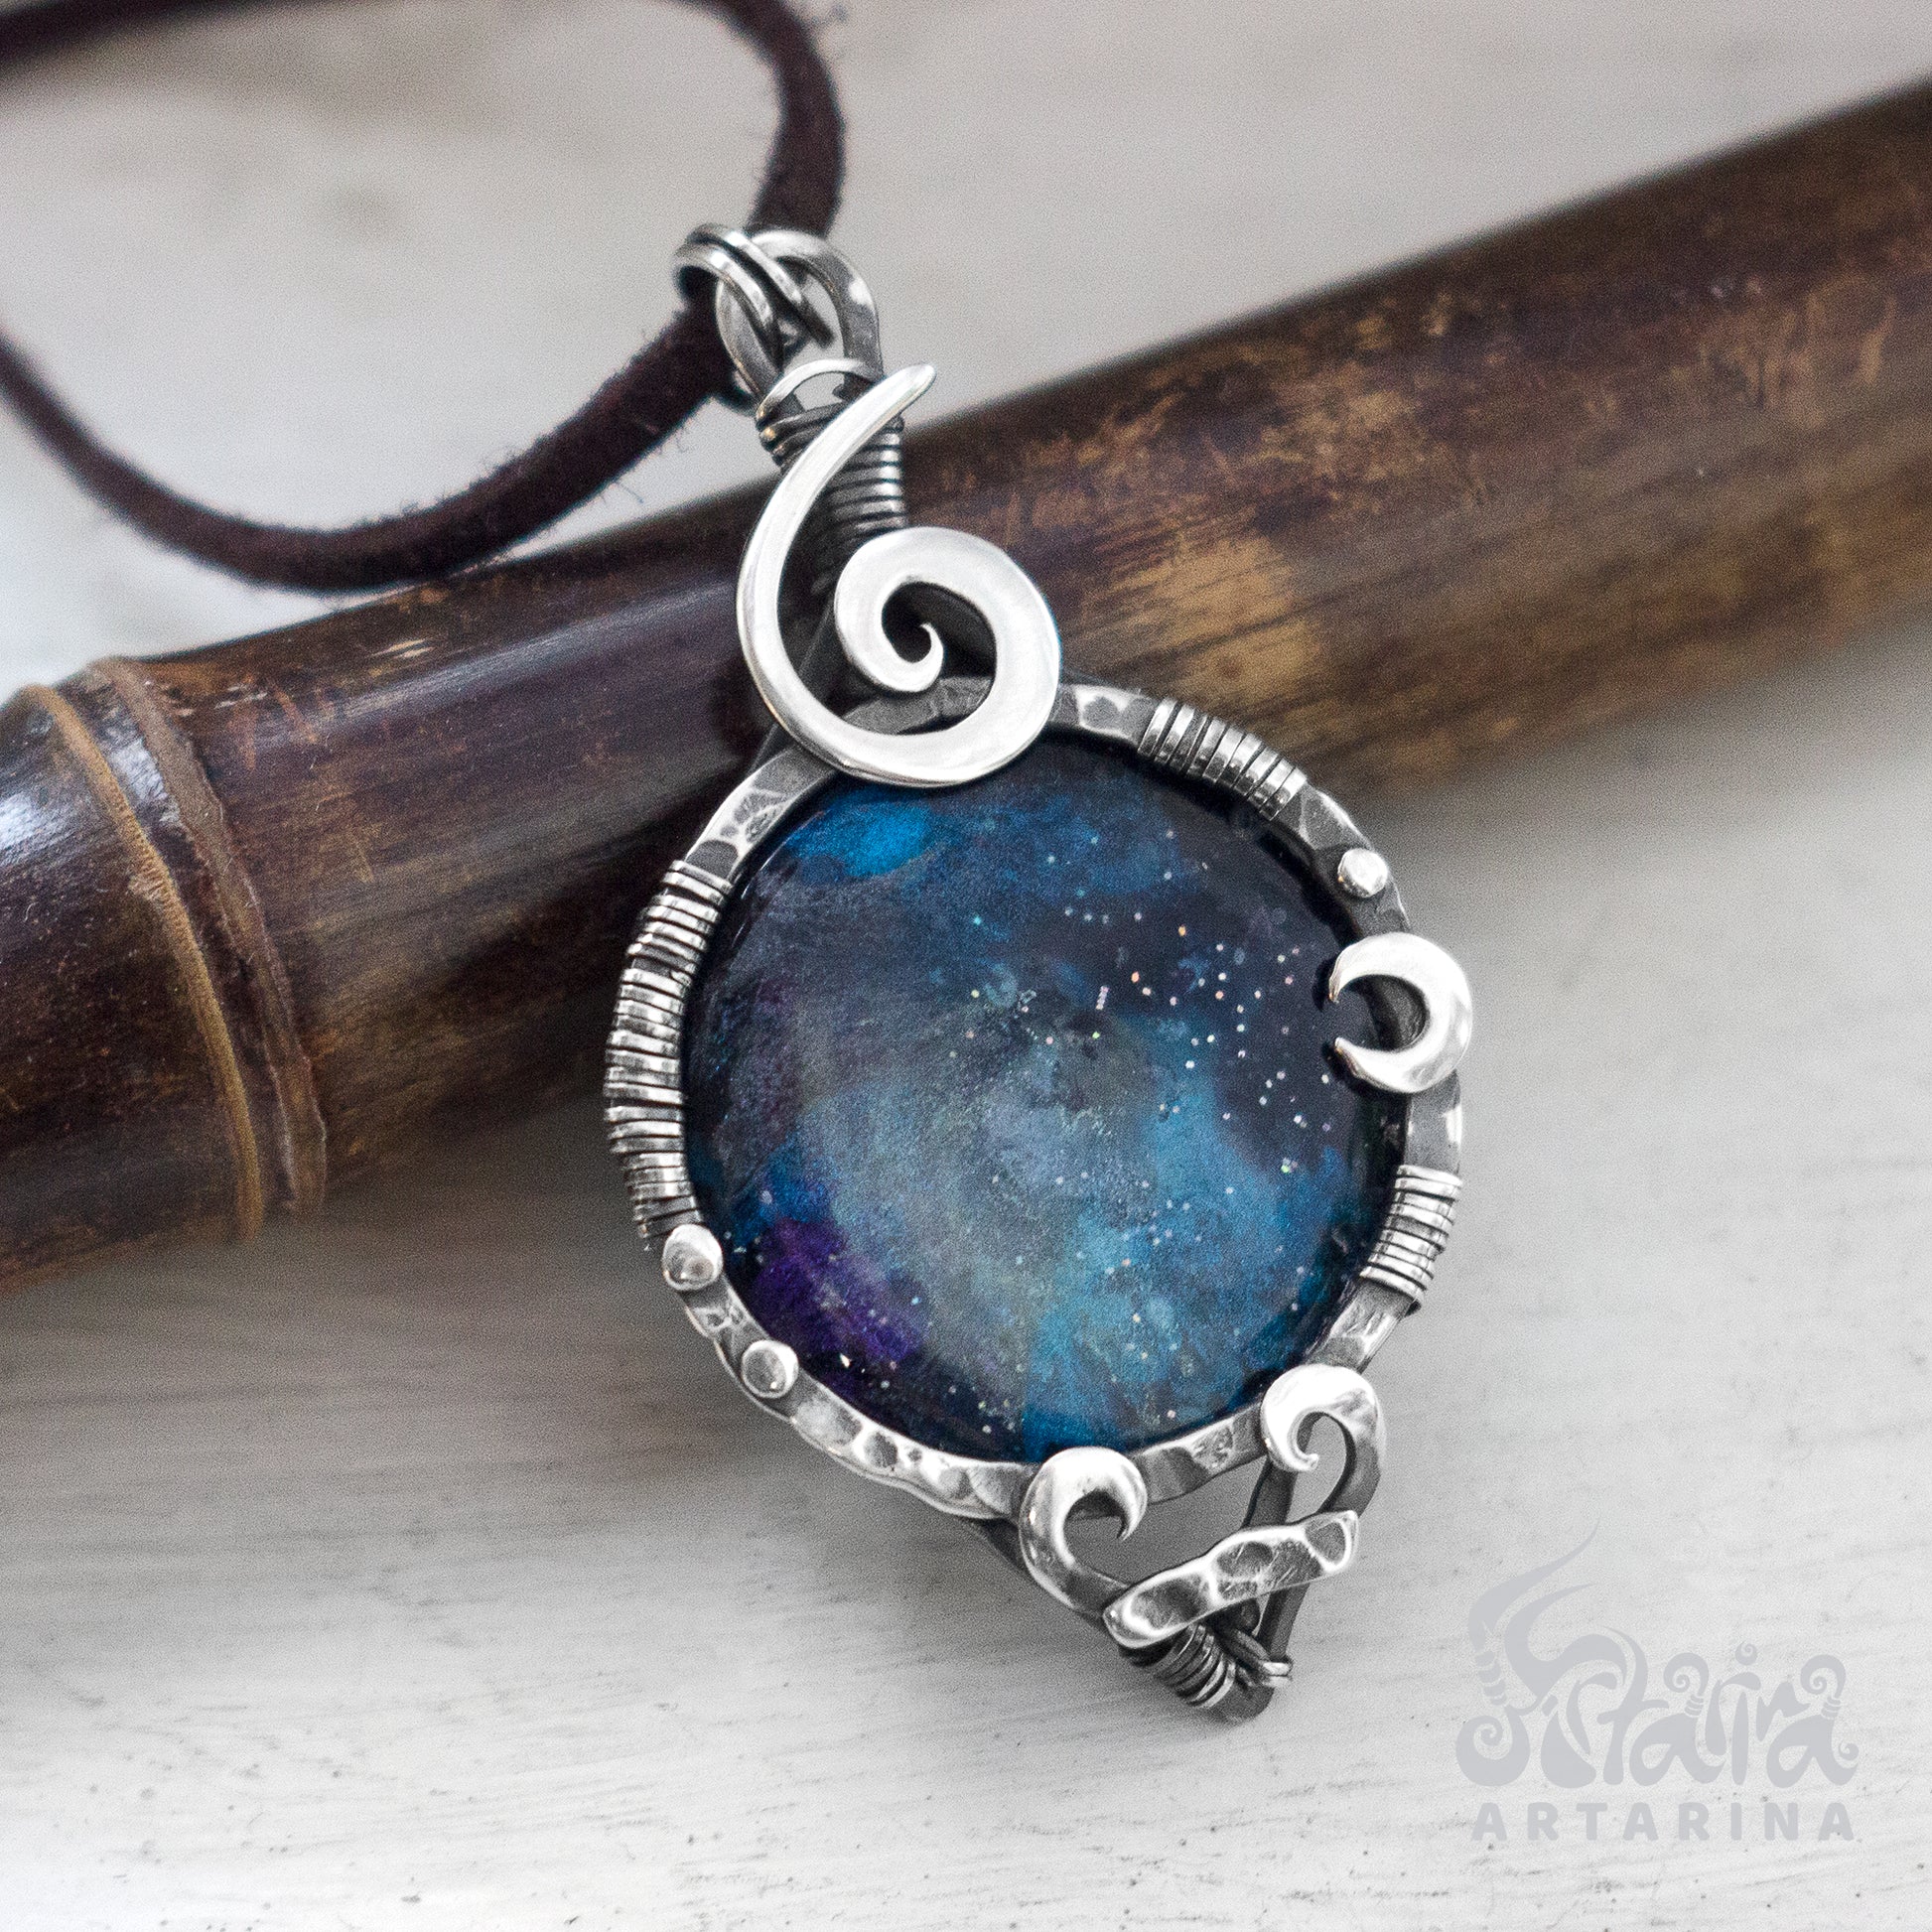 Handmade silver pendant with a cosmic stellar nebula design and a hand-painted night sky epoxy resin cabochon. pic